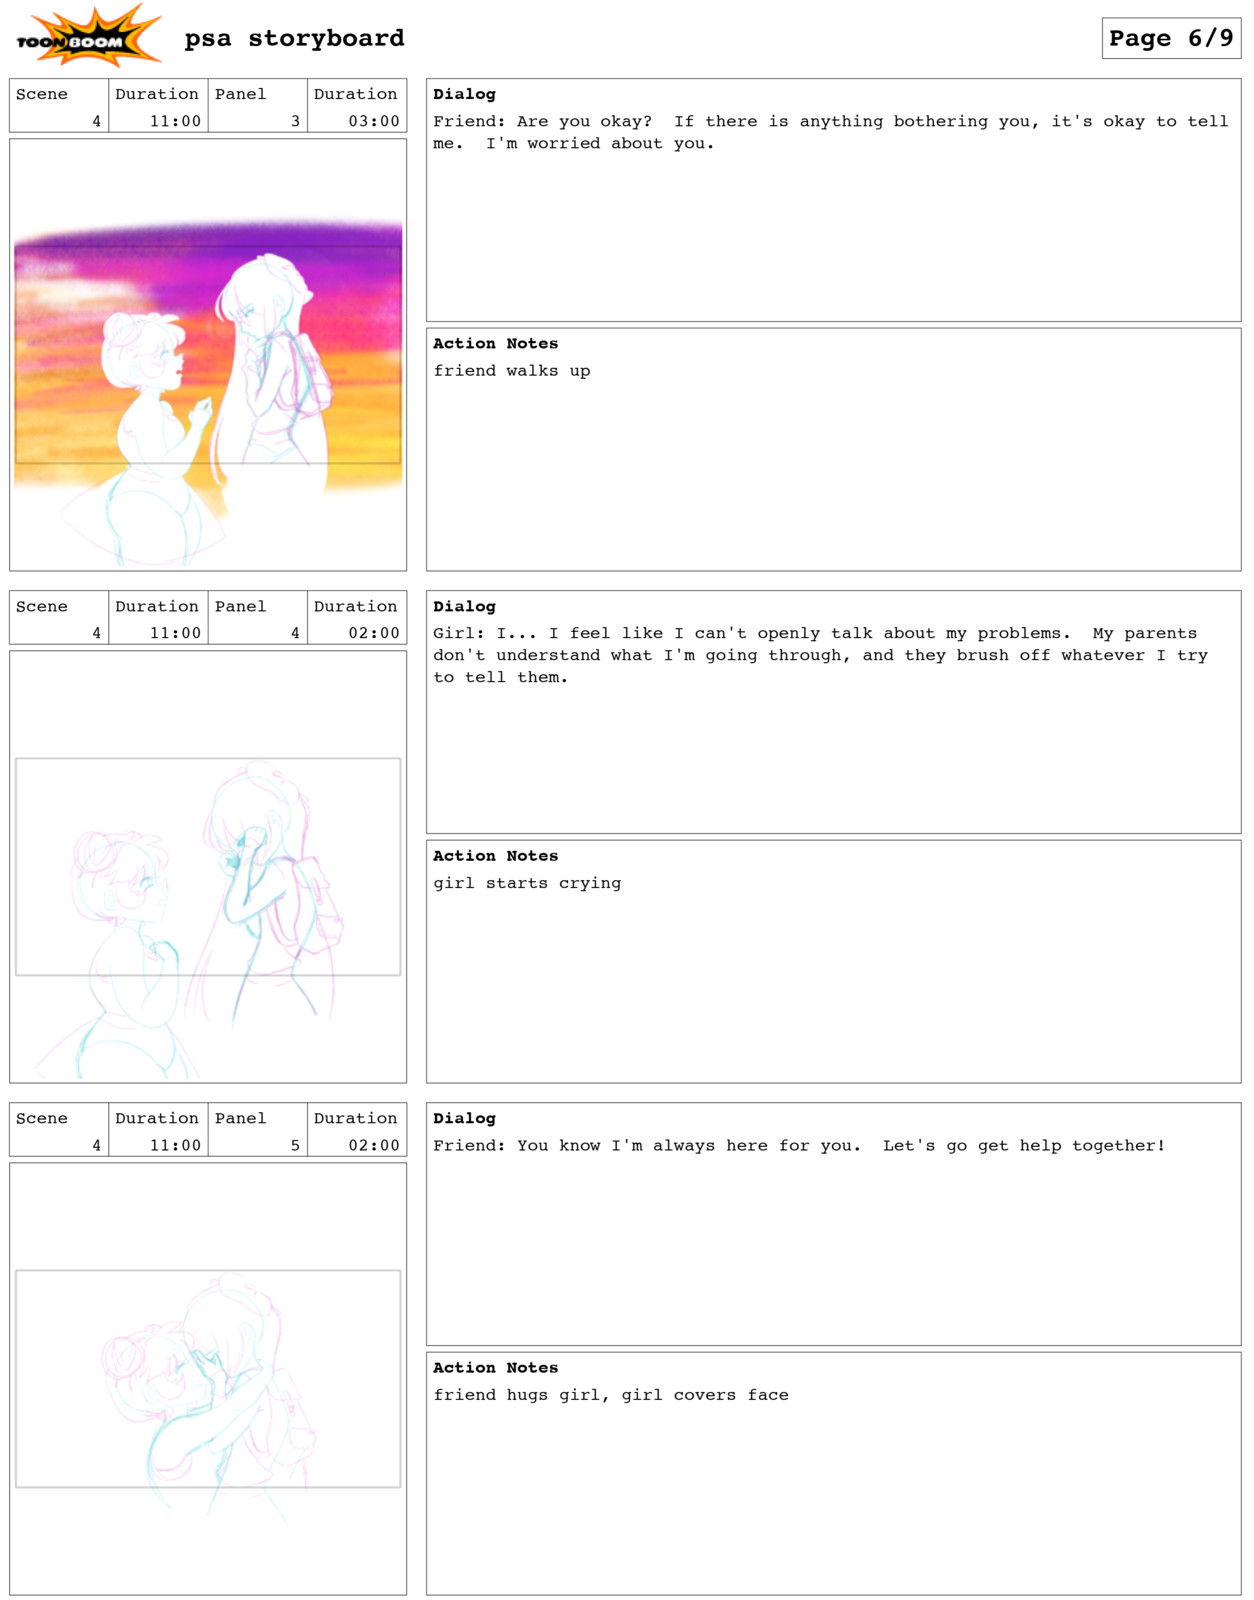 Page 6 of storyboard.